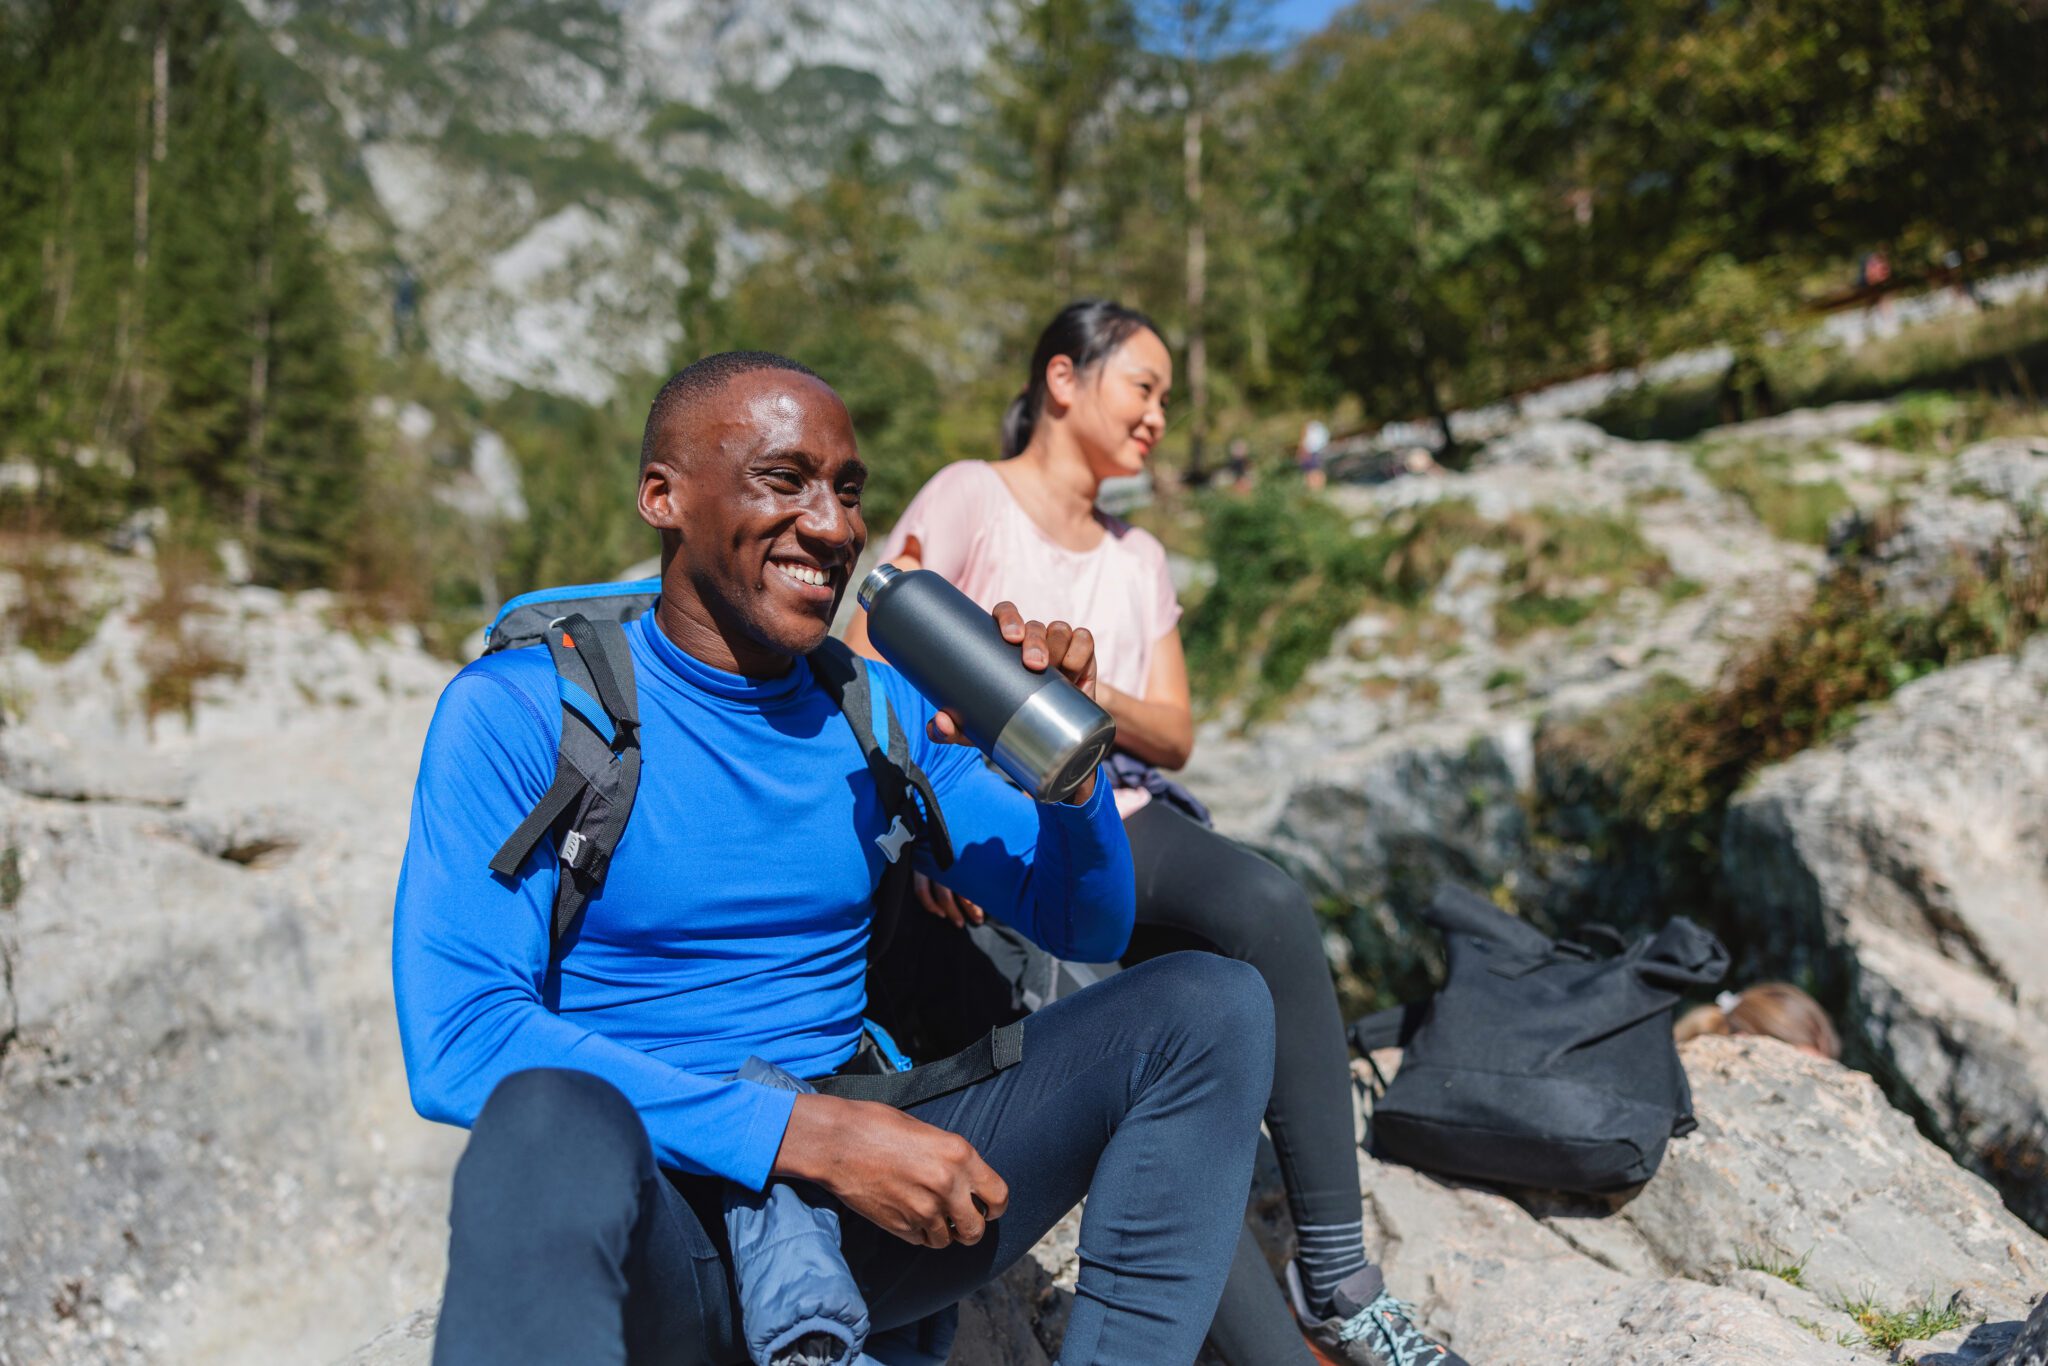 Two friends, a Black man and an Asian woman, rest and hydrate while hiking in a rocky mountain area on a sunny day.